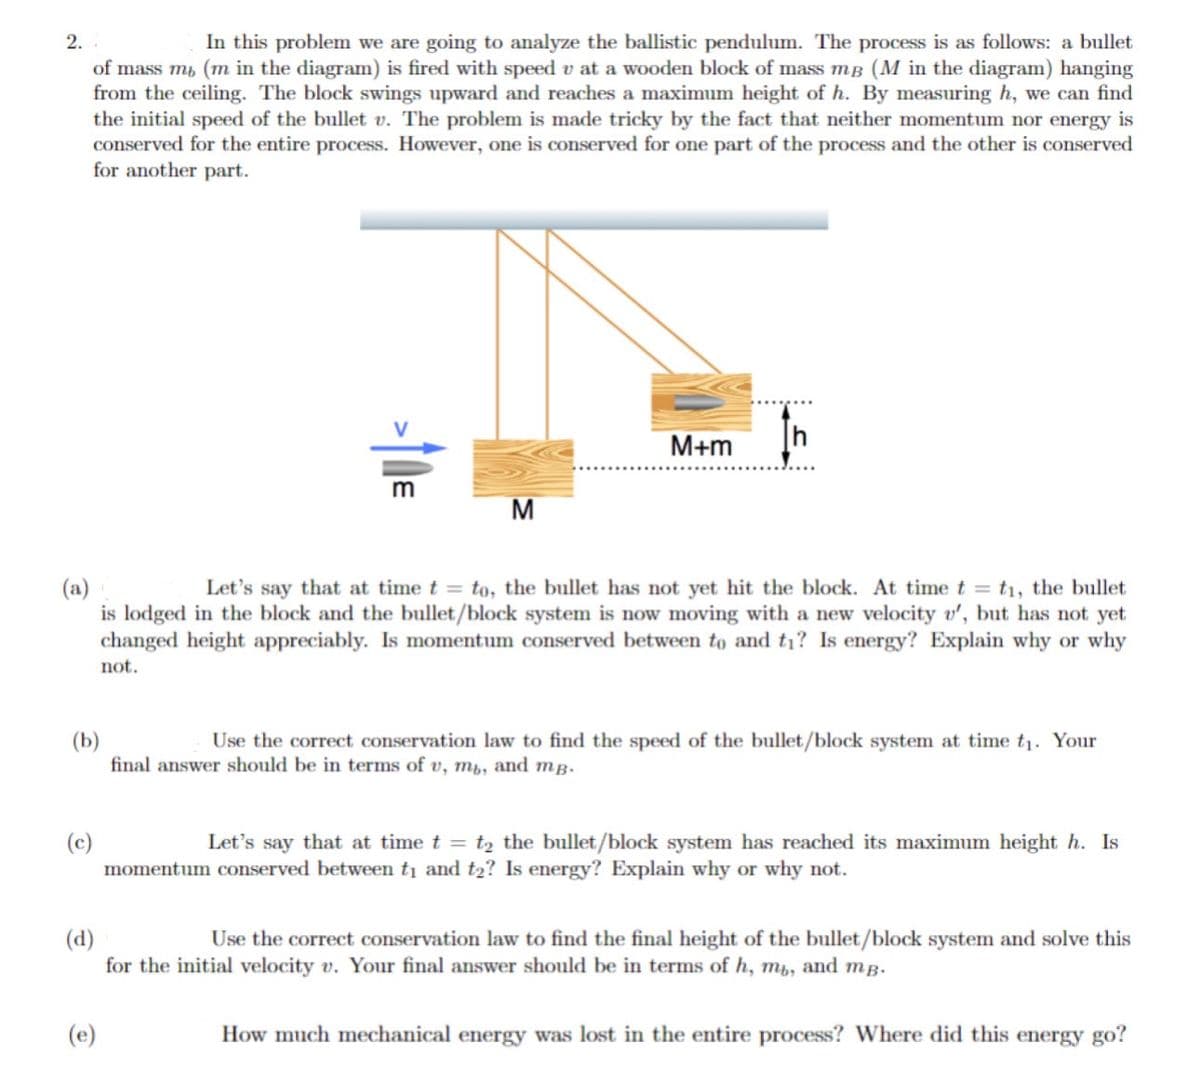 2.
In this problem we are going to analyze the ballistic pendulum. The process is as follows: a bullet
of mass m, (m in the diagram) is fired with speed v at a wooden block of mass m3 (M in the diagram) hanging
from the ceiling. The block swings upward and reaches a maximum height of h. By measuring h, we can find
the initial speed of the bullet v. The problem is made tricky by the fact that neither momentum nor energy is
conserved for the entire process. However, one is conserved for one part of the process and the other is conserved
for another part.
>↑DE
(c)
M
(a)
Let's say that at time t = to, the bullet has not yet hit the block. At time t = t₁, the bullet
is lodged in the block and the bullet/block system is now moving with a new velocity v', but has not yet
changed height appreciably. Is momentum conserved between to and t₁? Is energy? Explain why or why
not.
M+m
(b)
Use the correct conservation law to find the speed of the bullet/block system at time t₁. Your
final answer should be in terms of v, my, and mp.
(e)
Let's say that at time t = t₂ the bullet/block system has reached its maximum height h. Is
momentum conserved between t₁ and t₂? Is energy? Explain why or why not.
(d)
Use the correct conservation law to find the final height of the bullet/block system and solve this
for the initial velocity v. Your final answer should be in terms of h, mu, and mp.
How much mechanical energy was lost in the entire process? Where did this energy go?